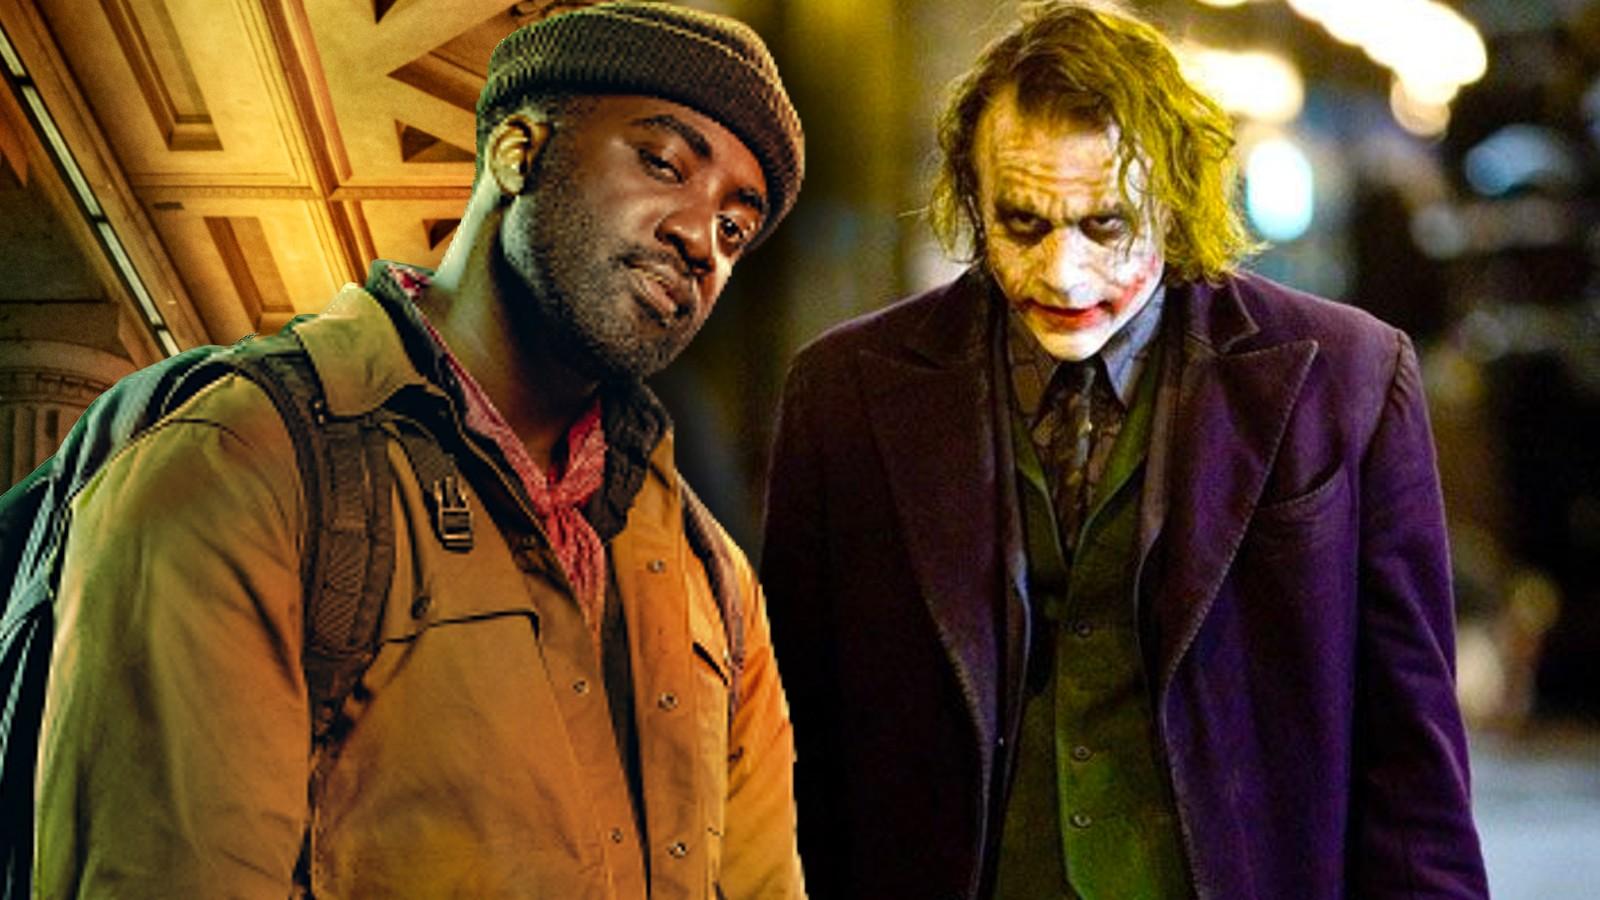 Shamier Anderson as the Tracker in John Wick: Chapter 4 and Heath Ledger's Joker in The Dark Knight